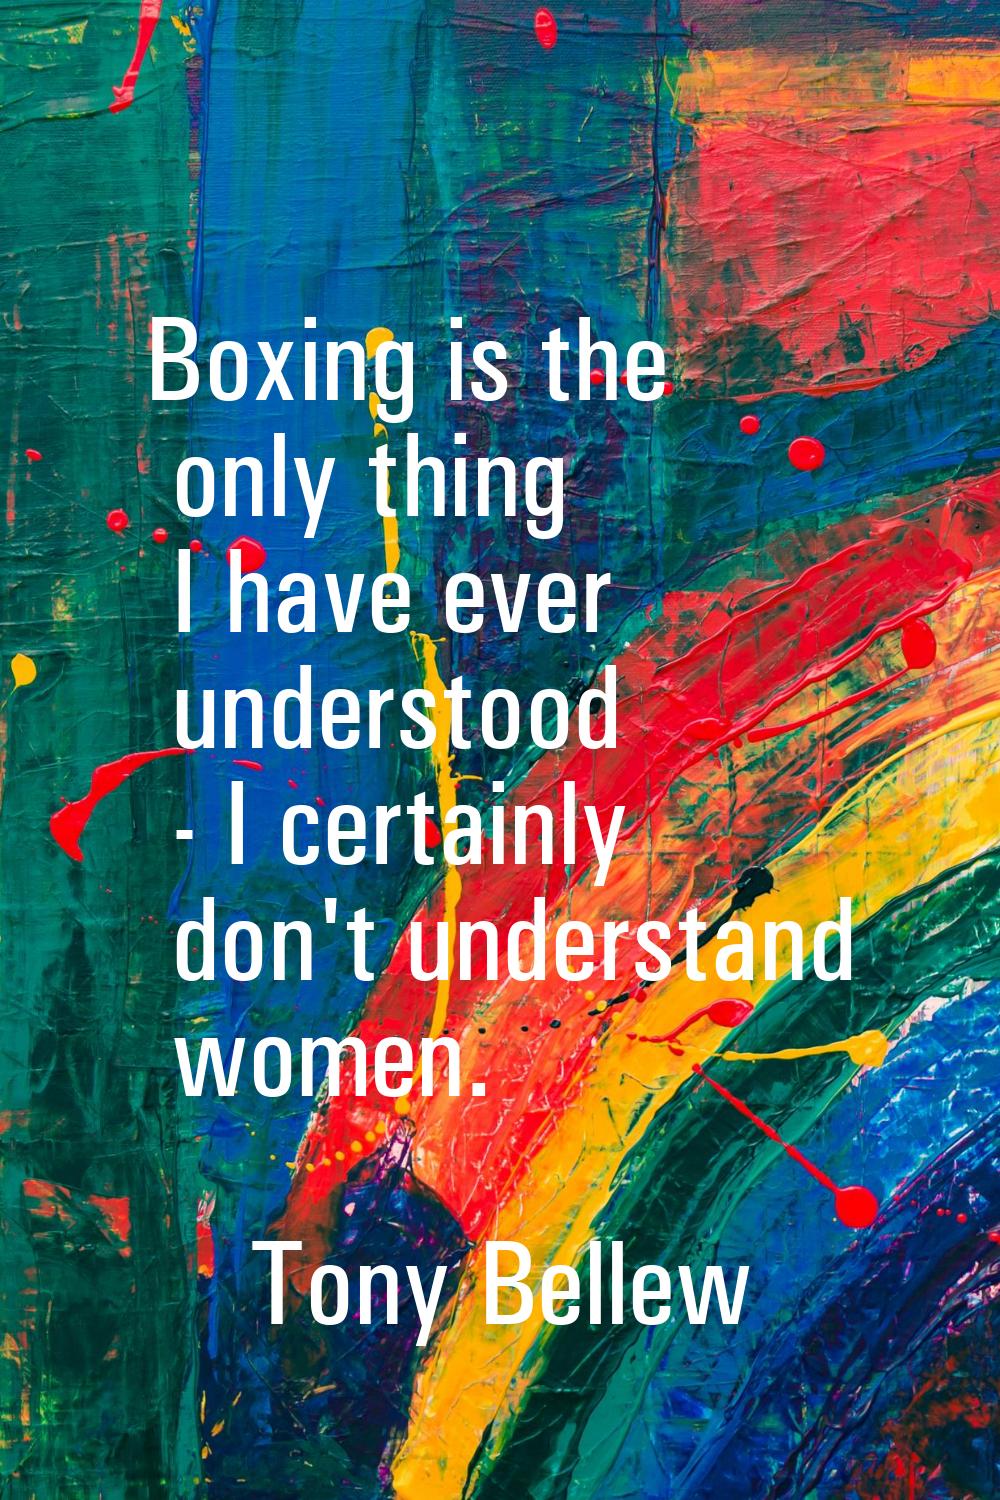 Boxing is the only thing I have ever understood - I certainly don't understand women.